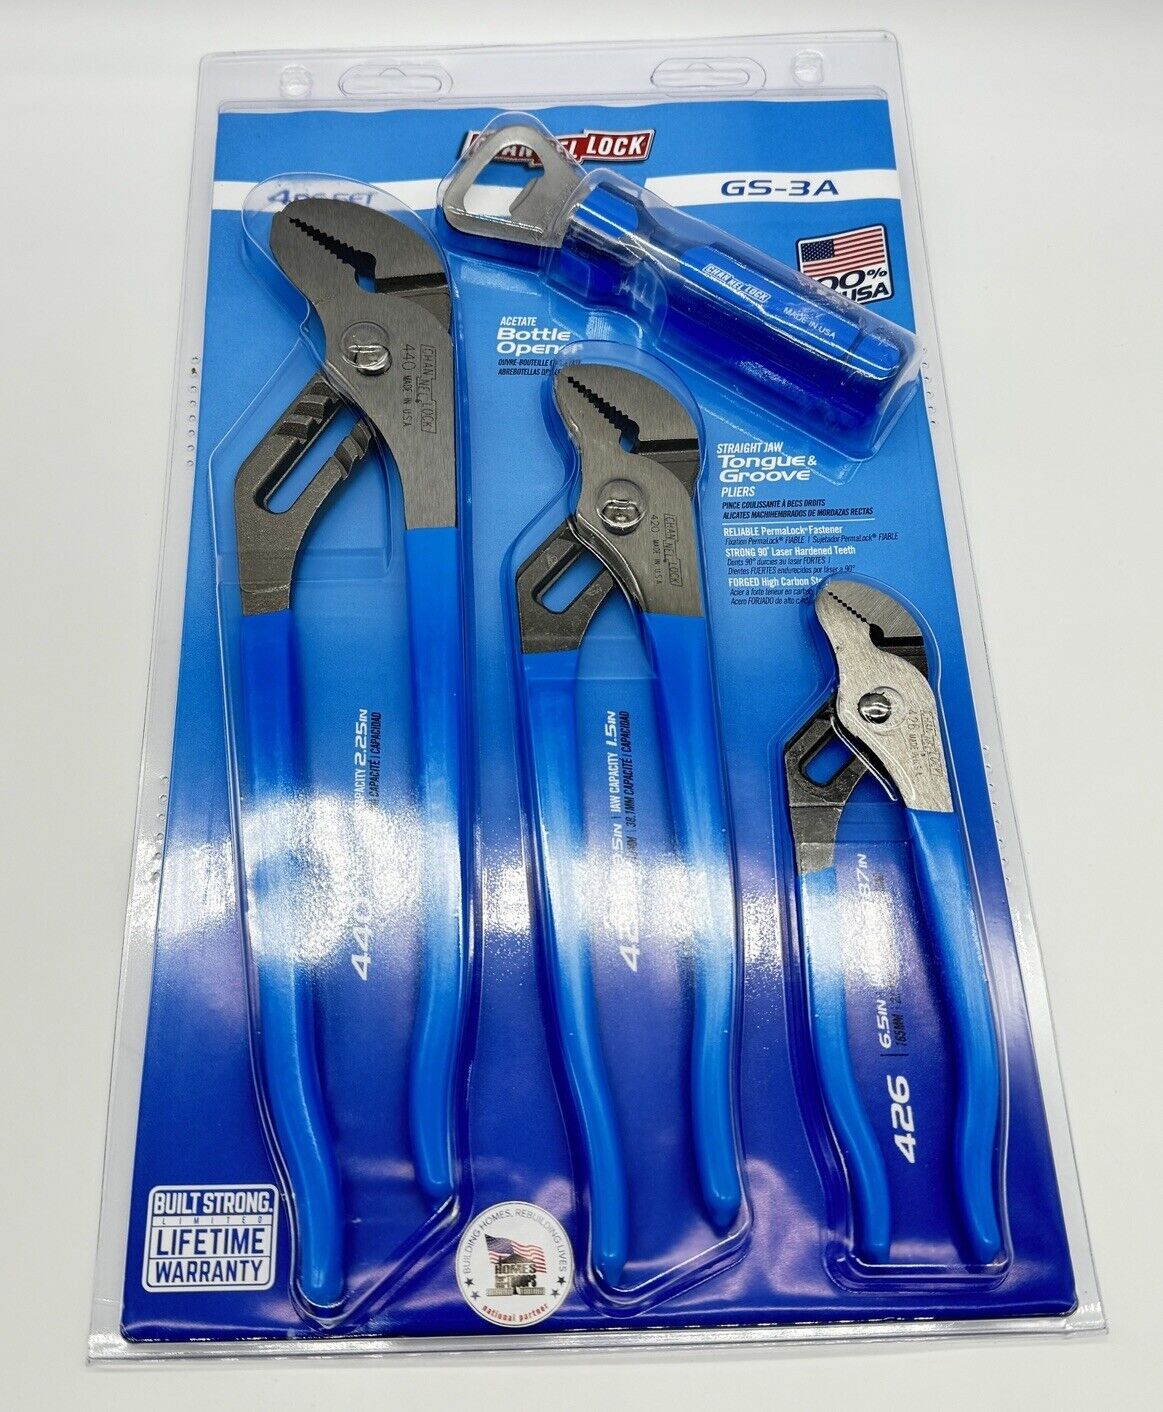 Channellock GS-3A  3-Piece Tongue and Groove Plier Set  -Blue (CHLGS-3)